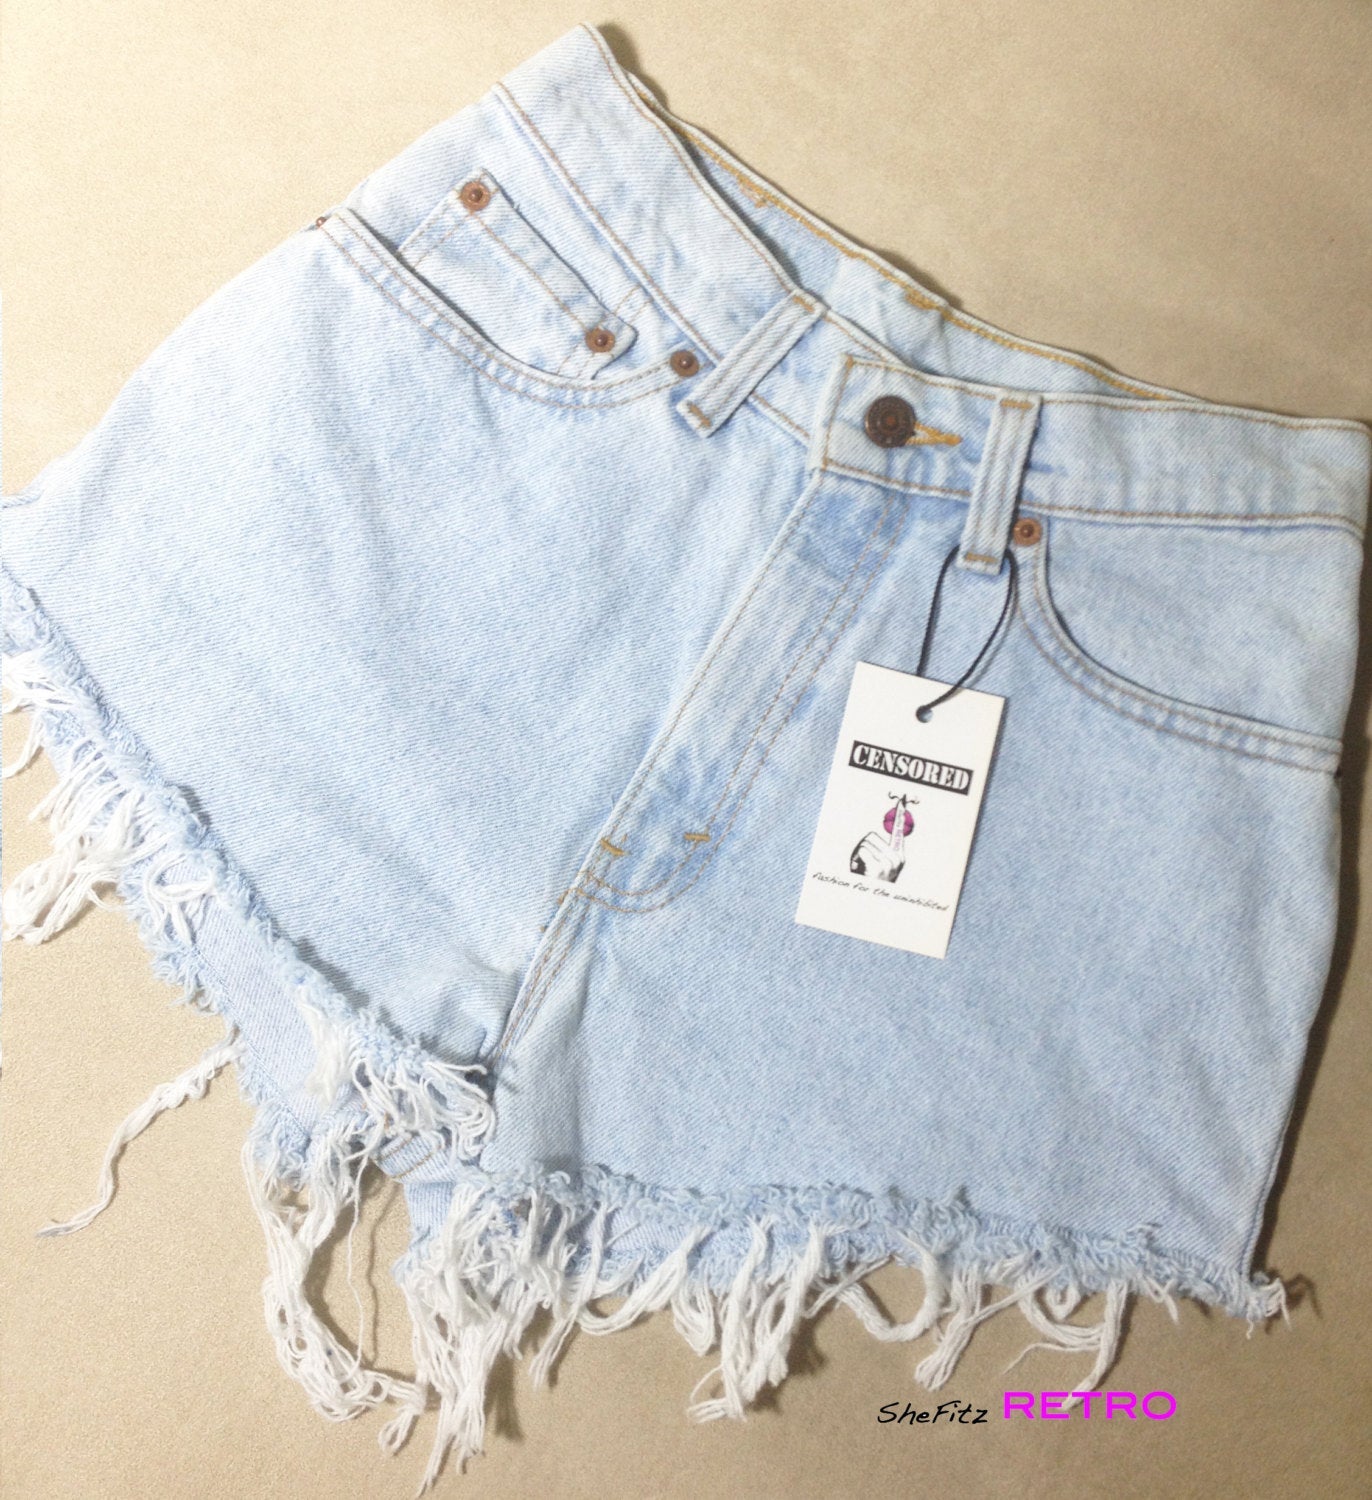 Made To Order Reworked High Waisted Vintage Cut Off Levis Shorts